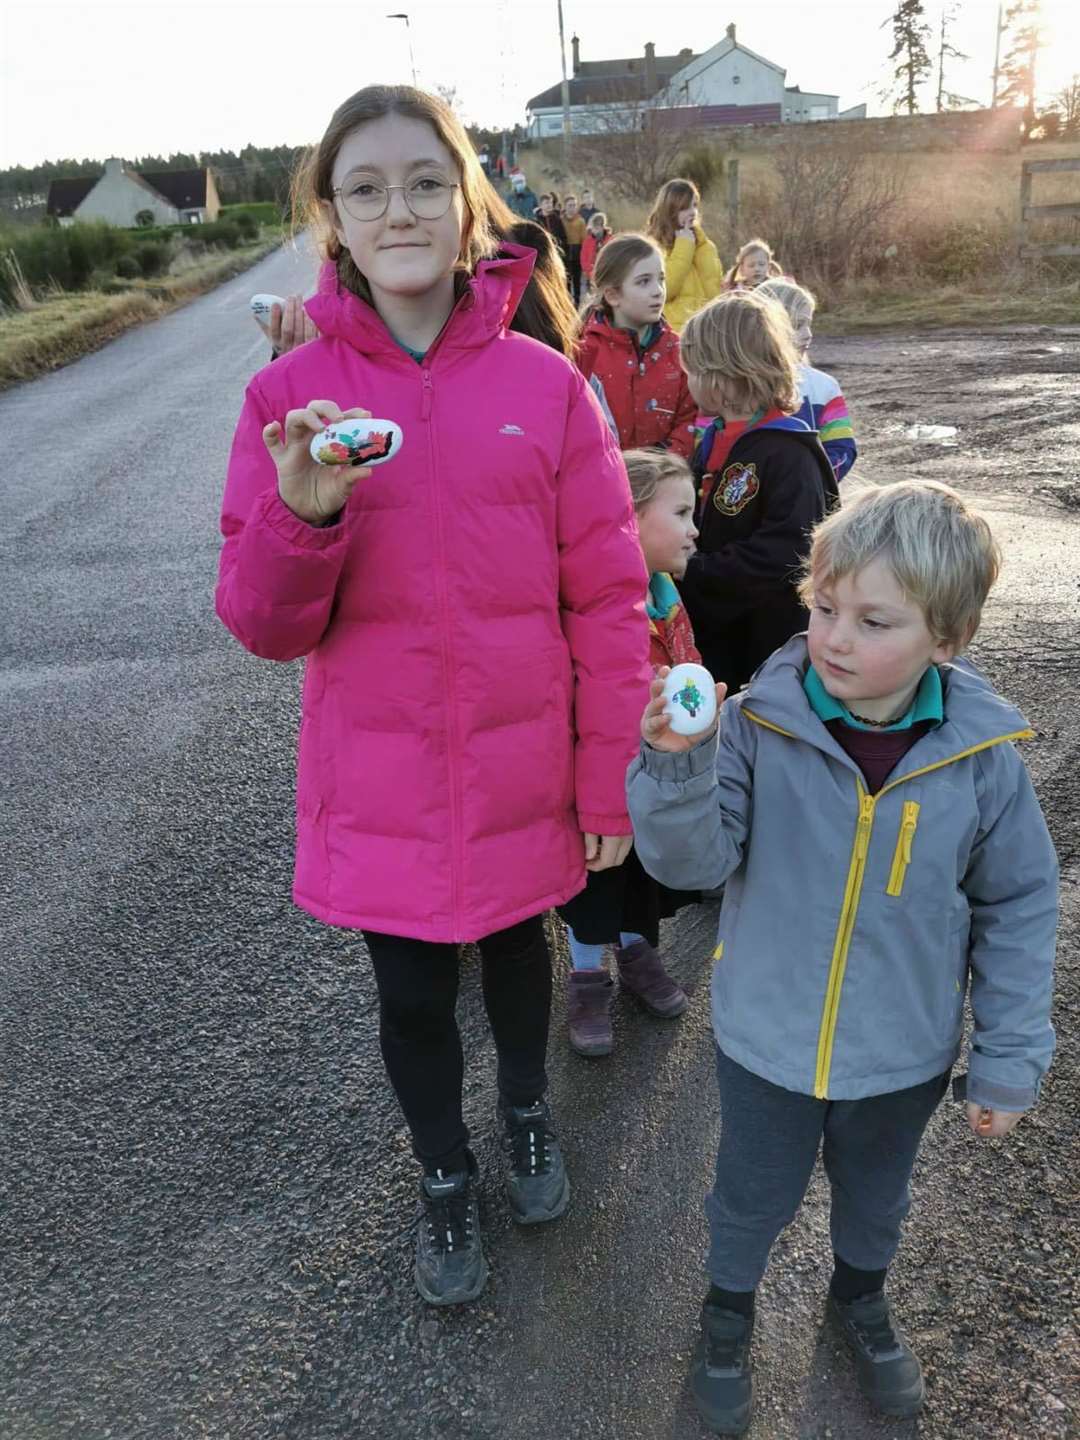 Annabel Gargaro (P7) and Tobi Lake (P1) leading the way to hand out painted stones.